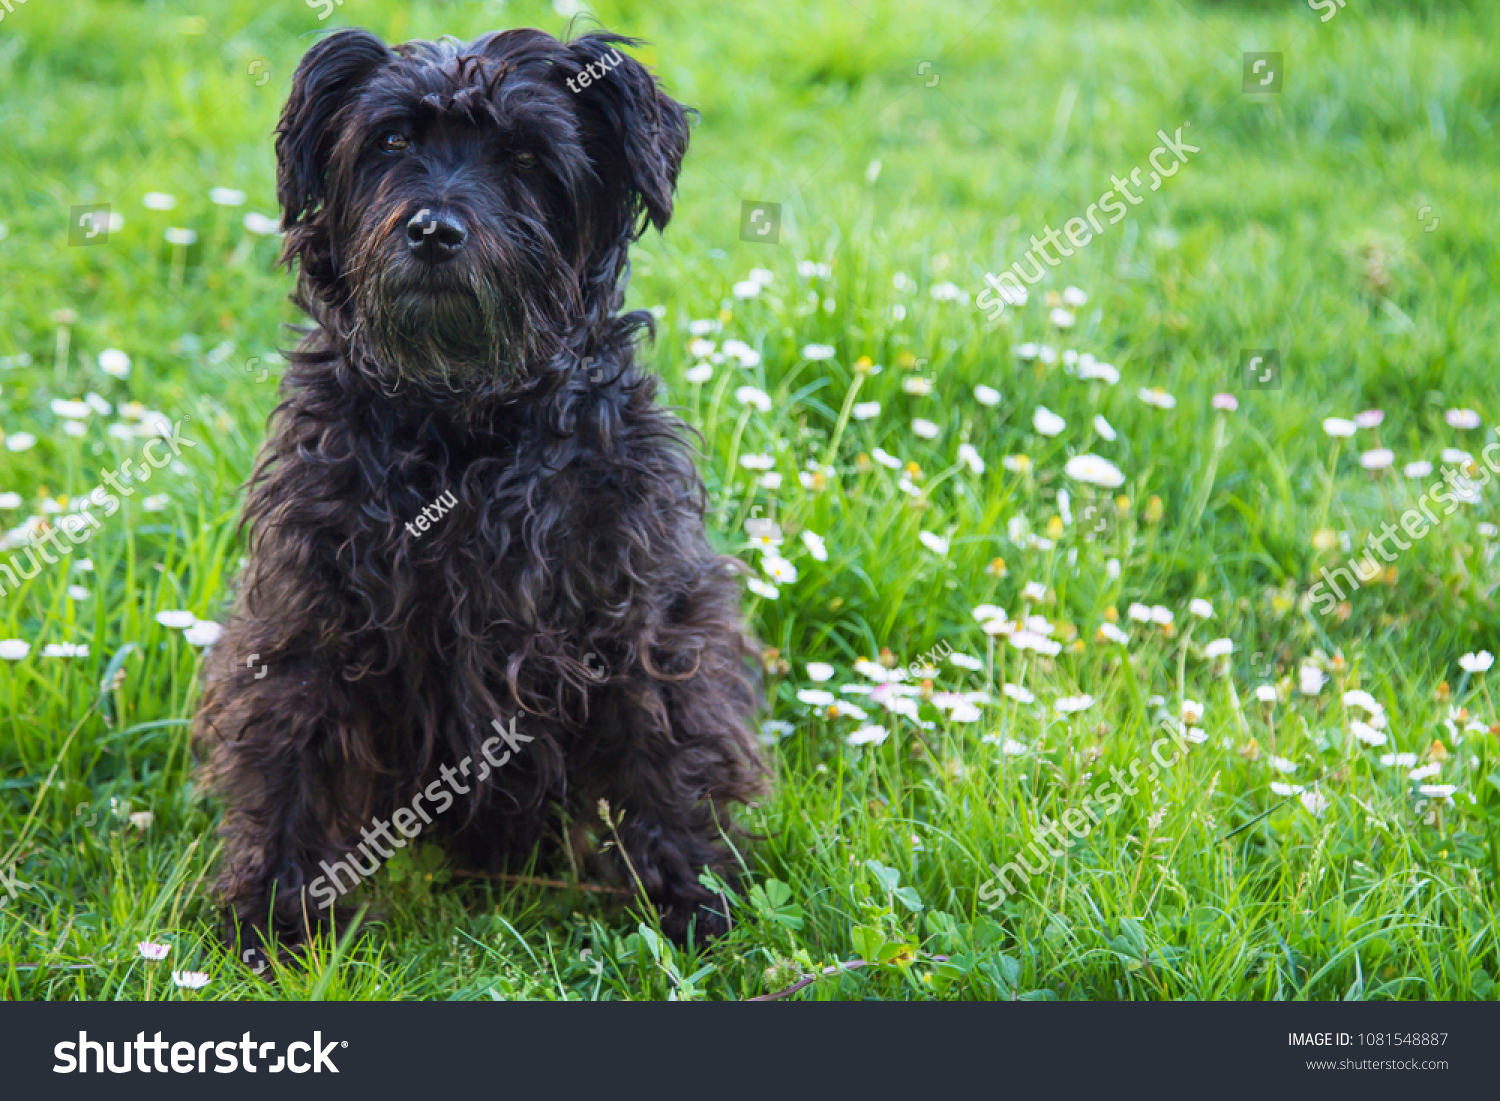 black schnauzer dog in the field of daisies #1081548887